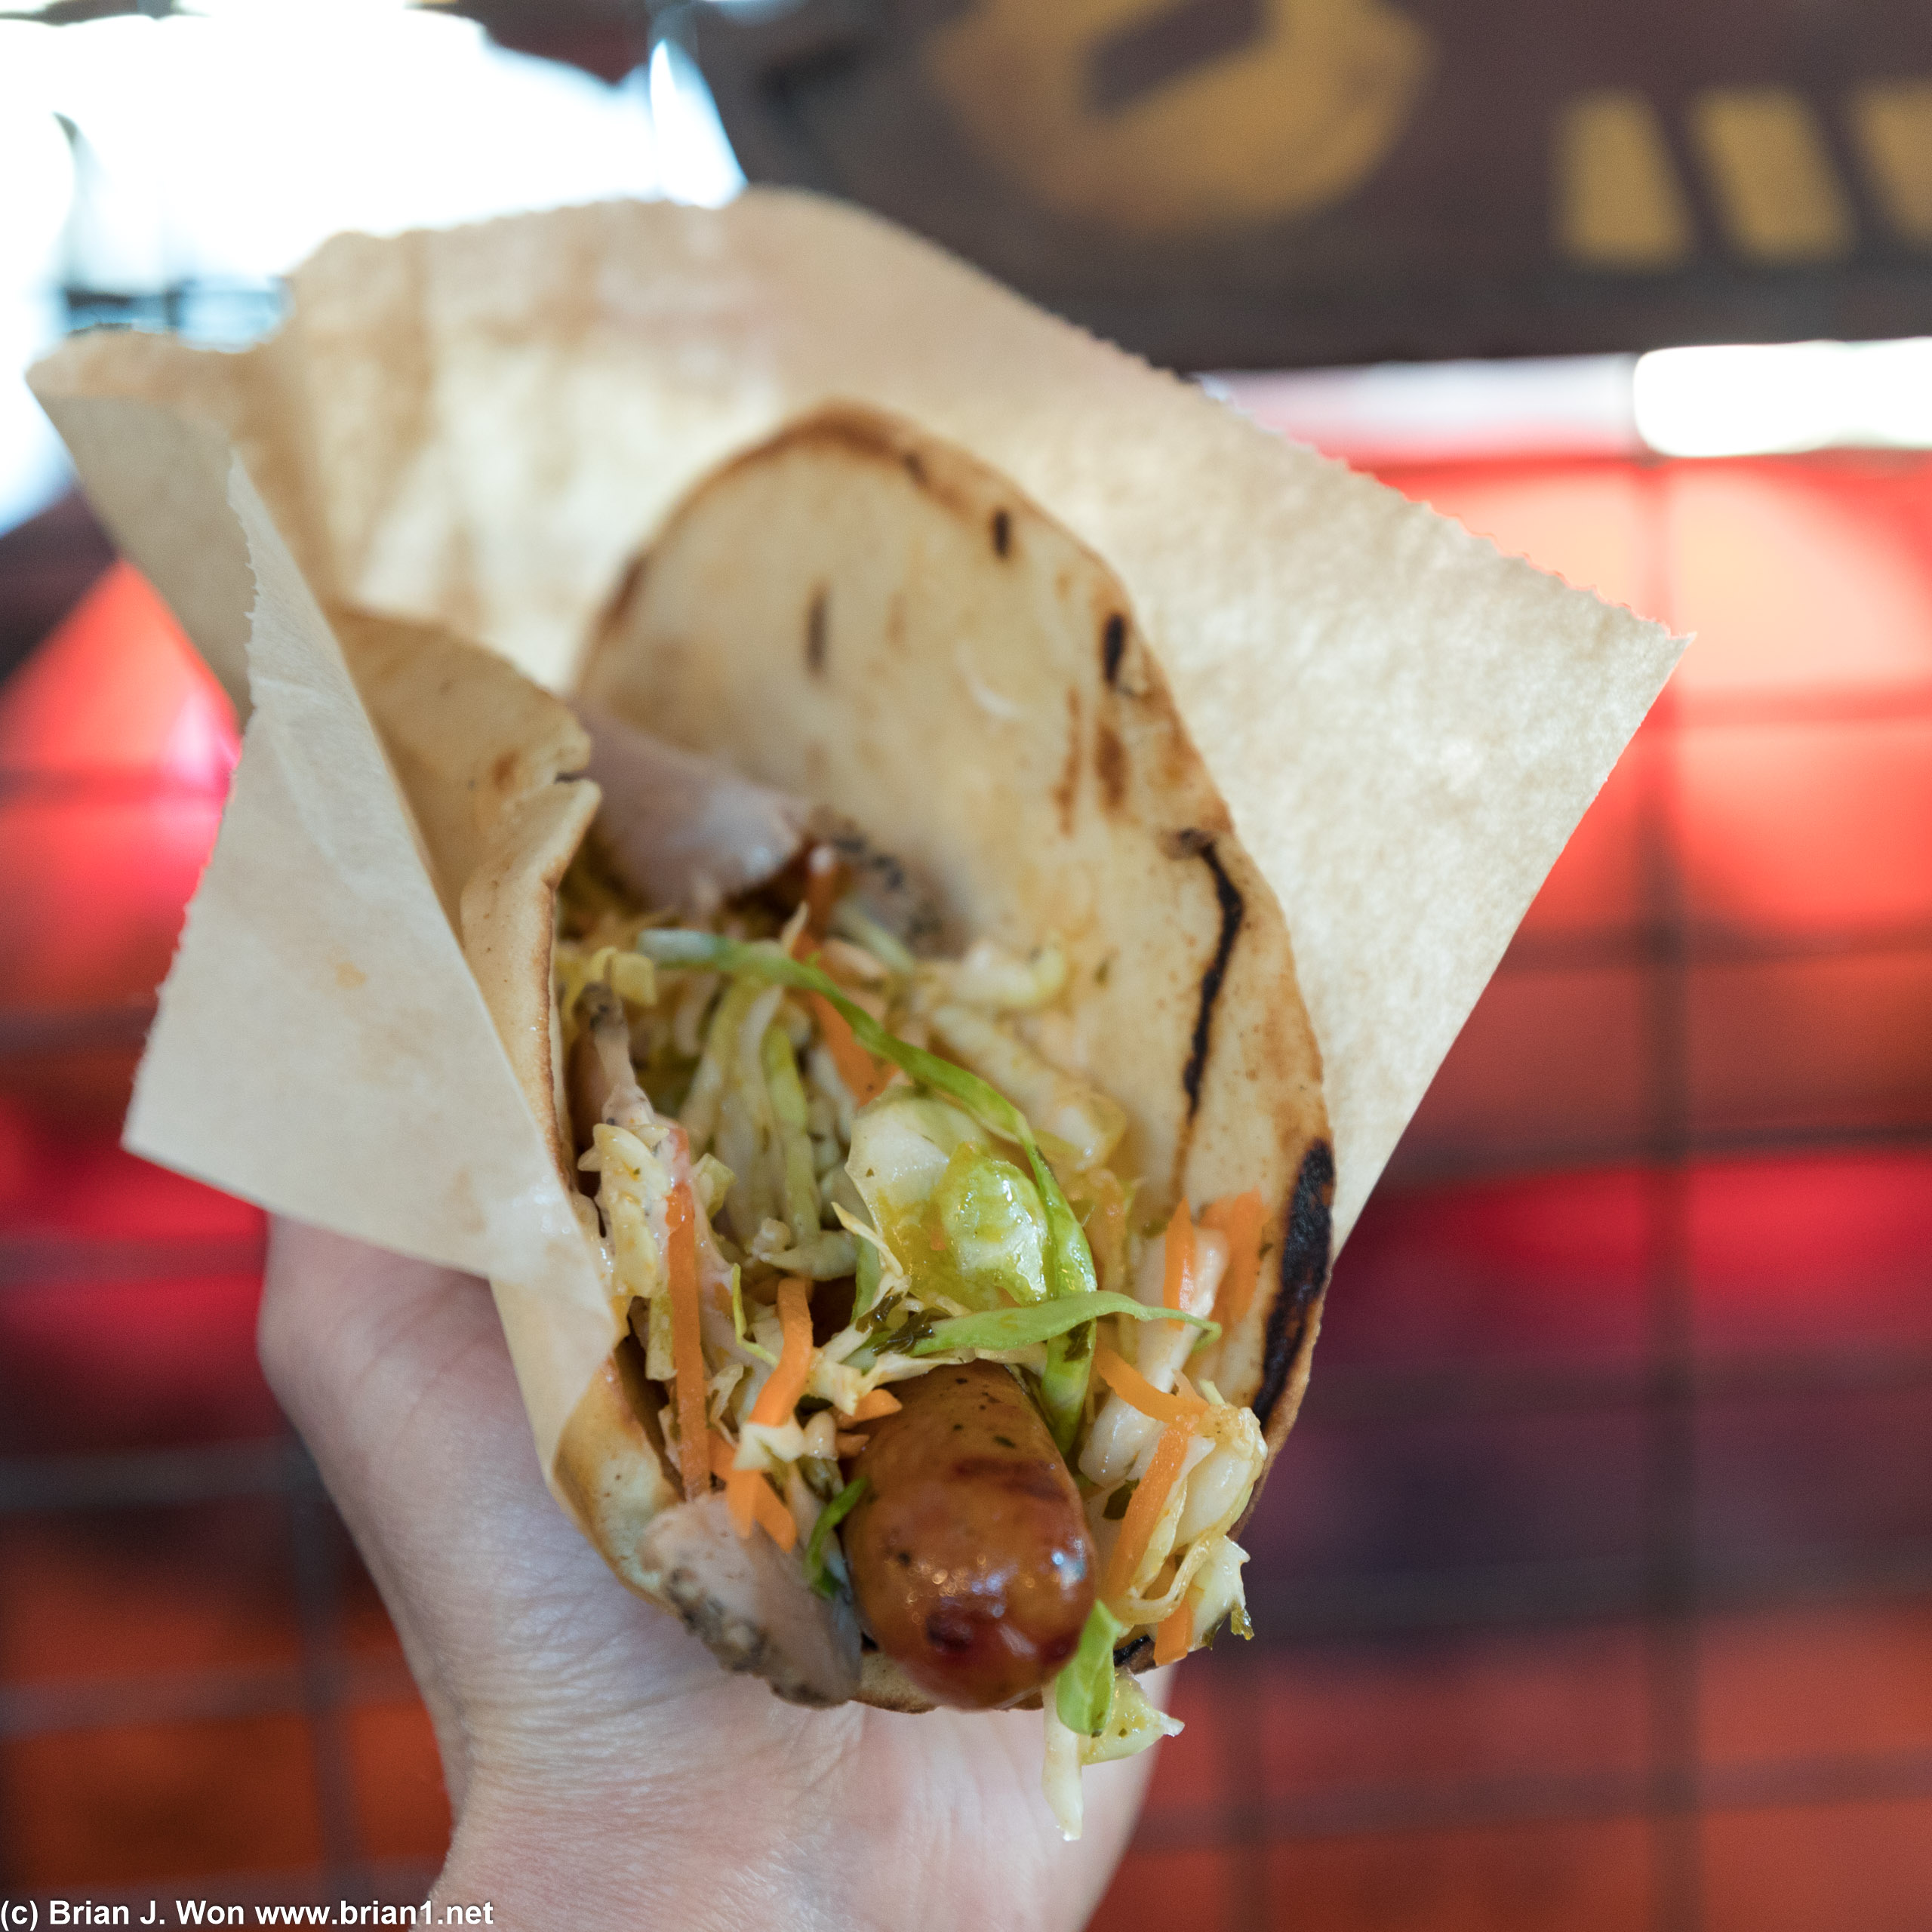 Ronto wrap is definitely the best meal item in Galaxy's Edge.